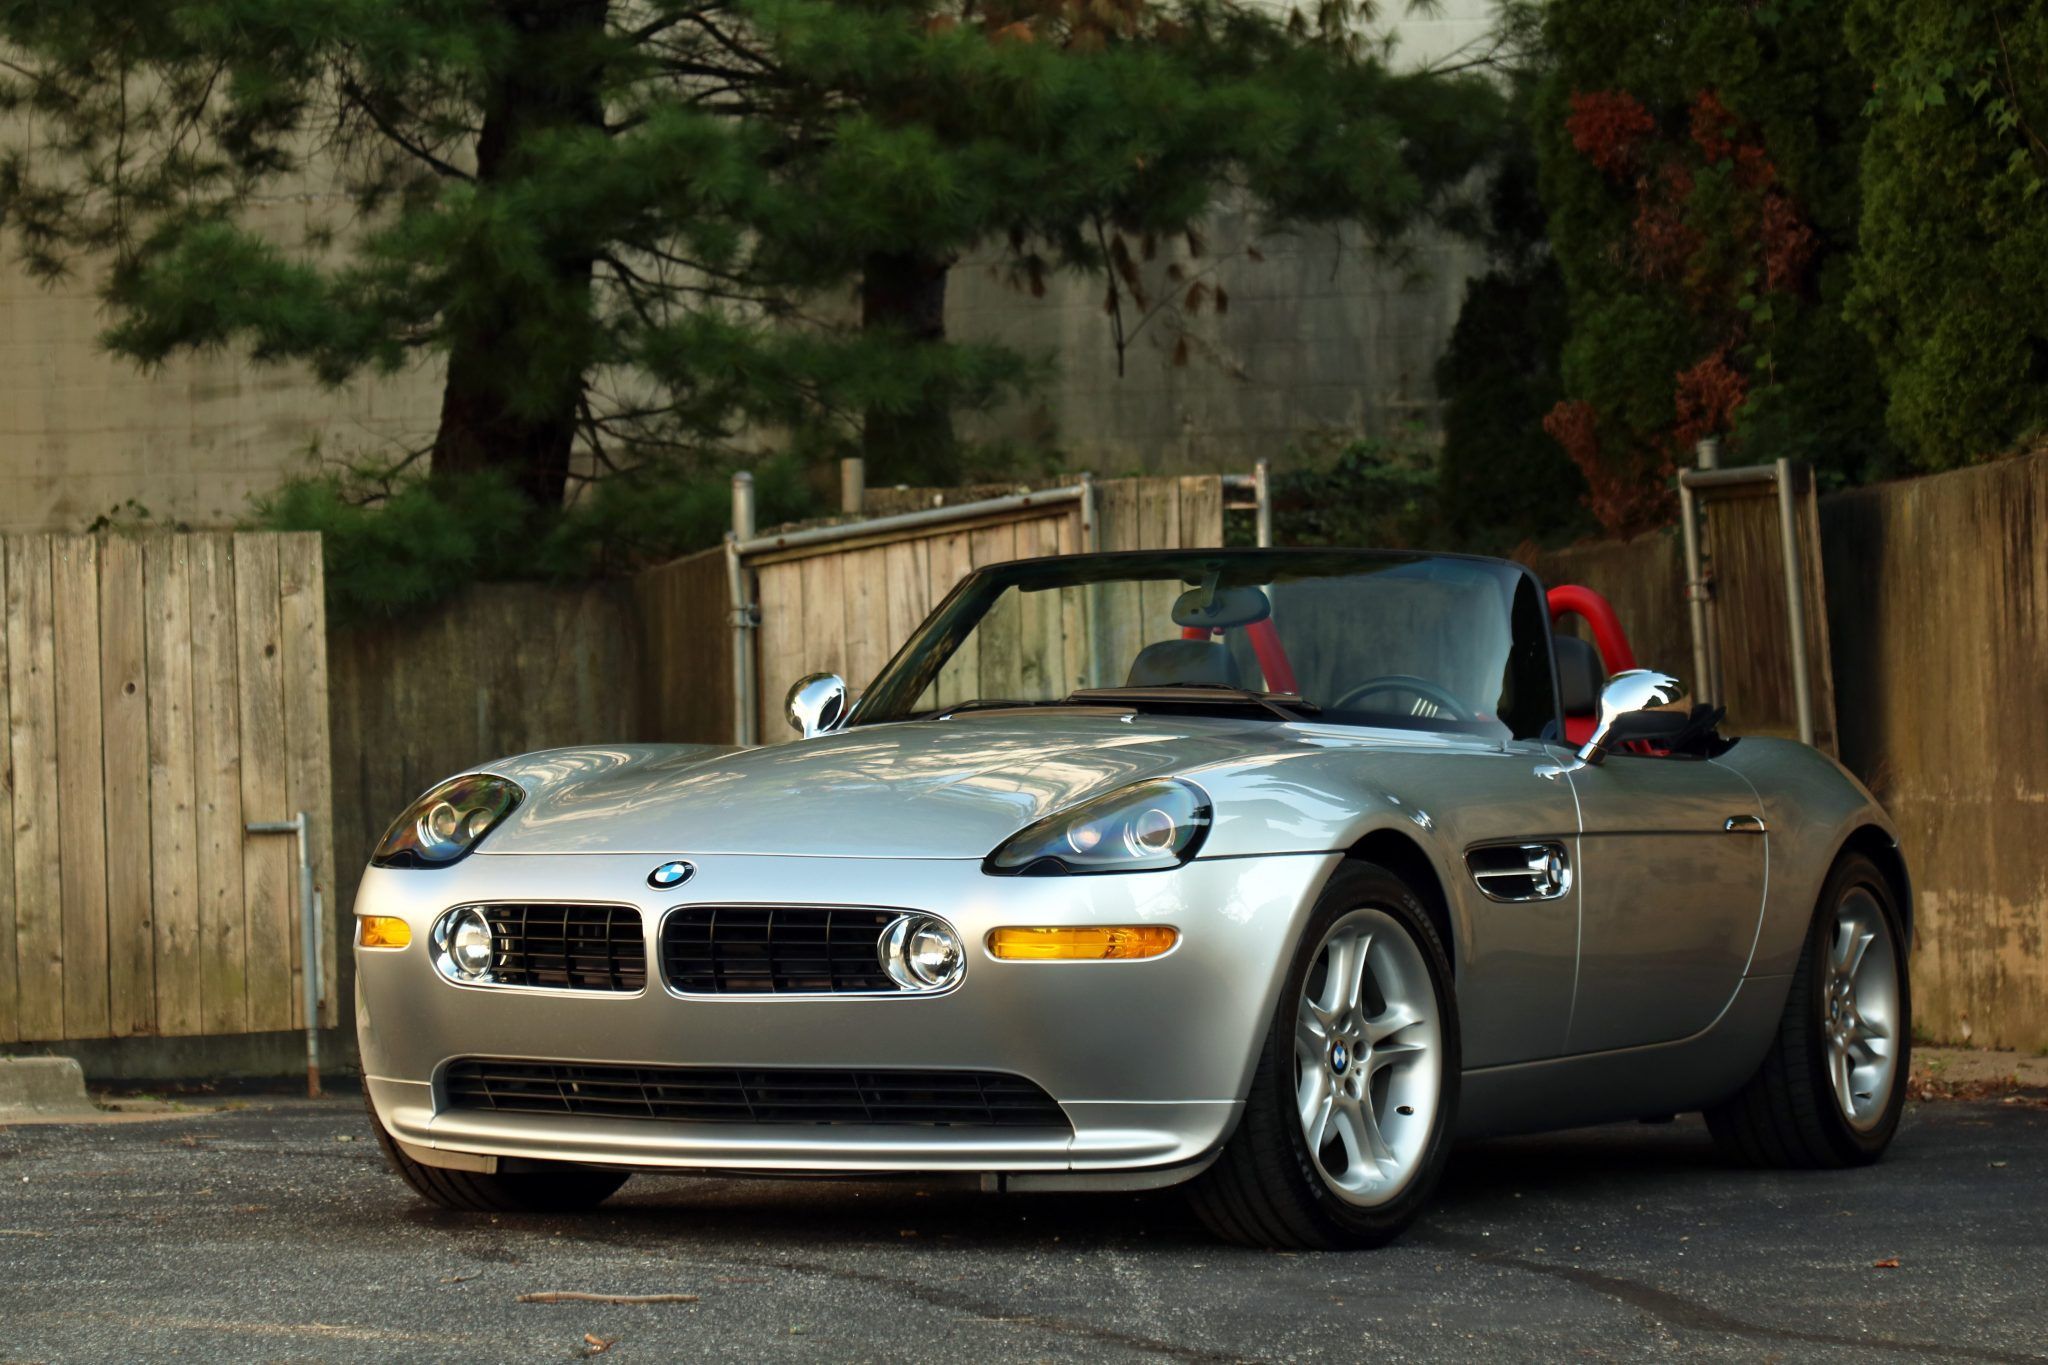 The BMW Z8 Is One of the Most Beautiful Cars Ever Built